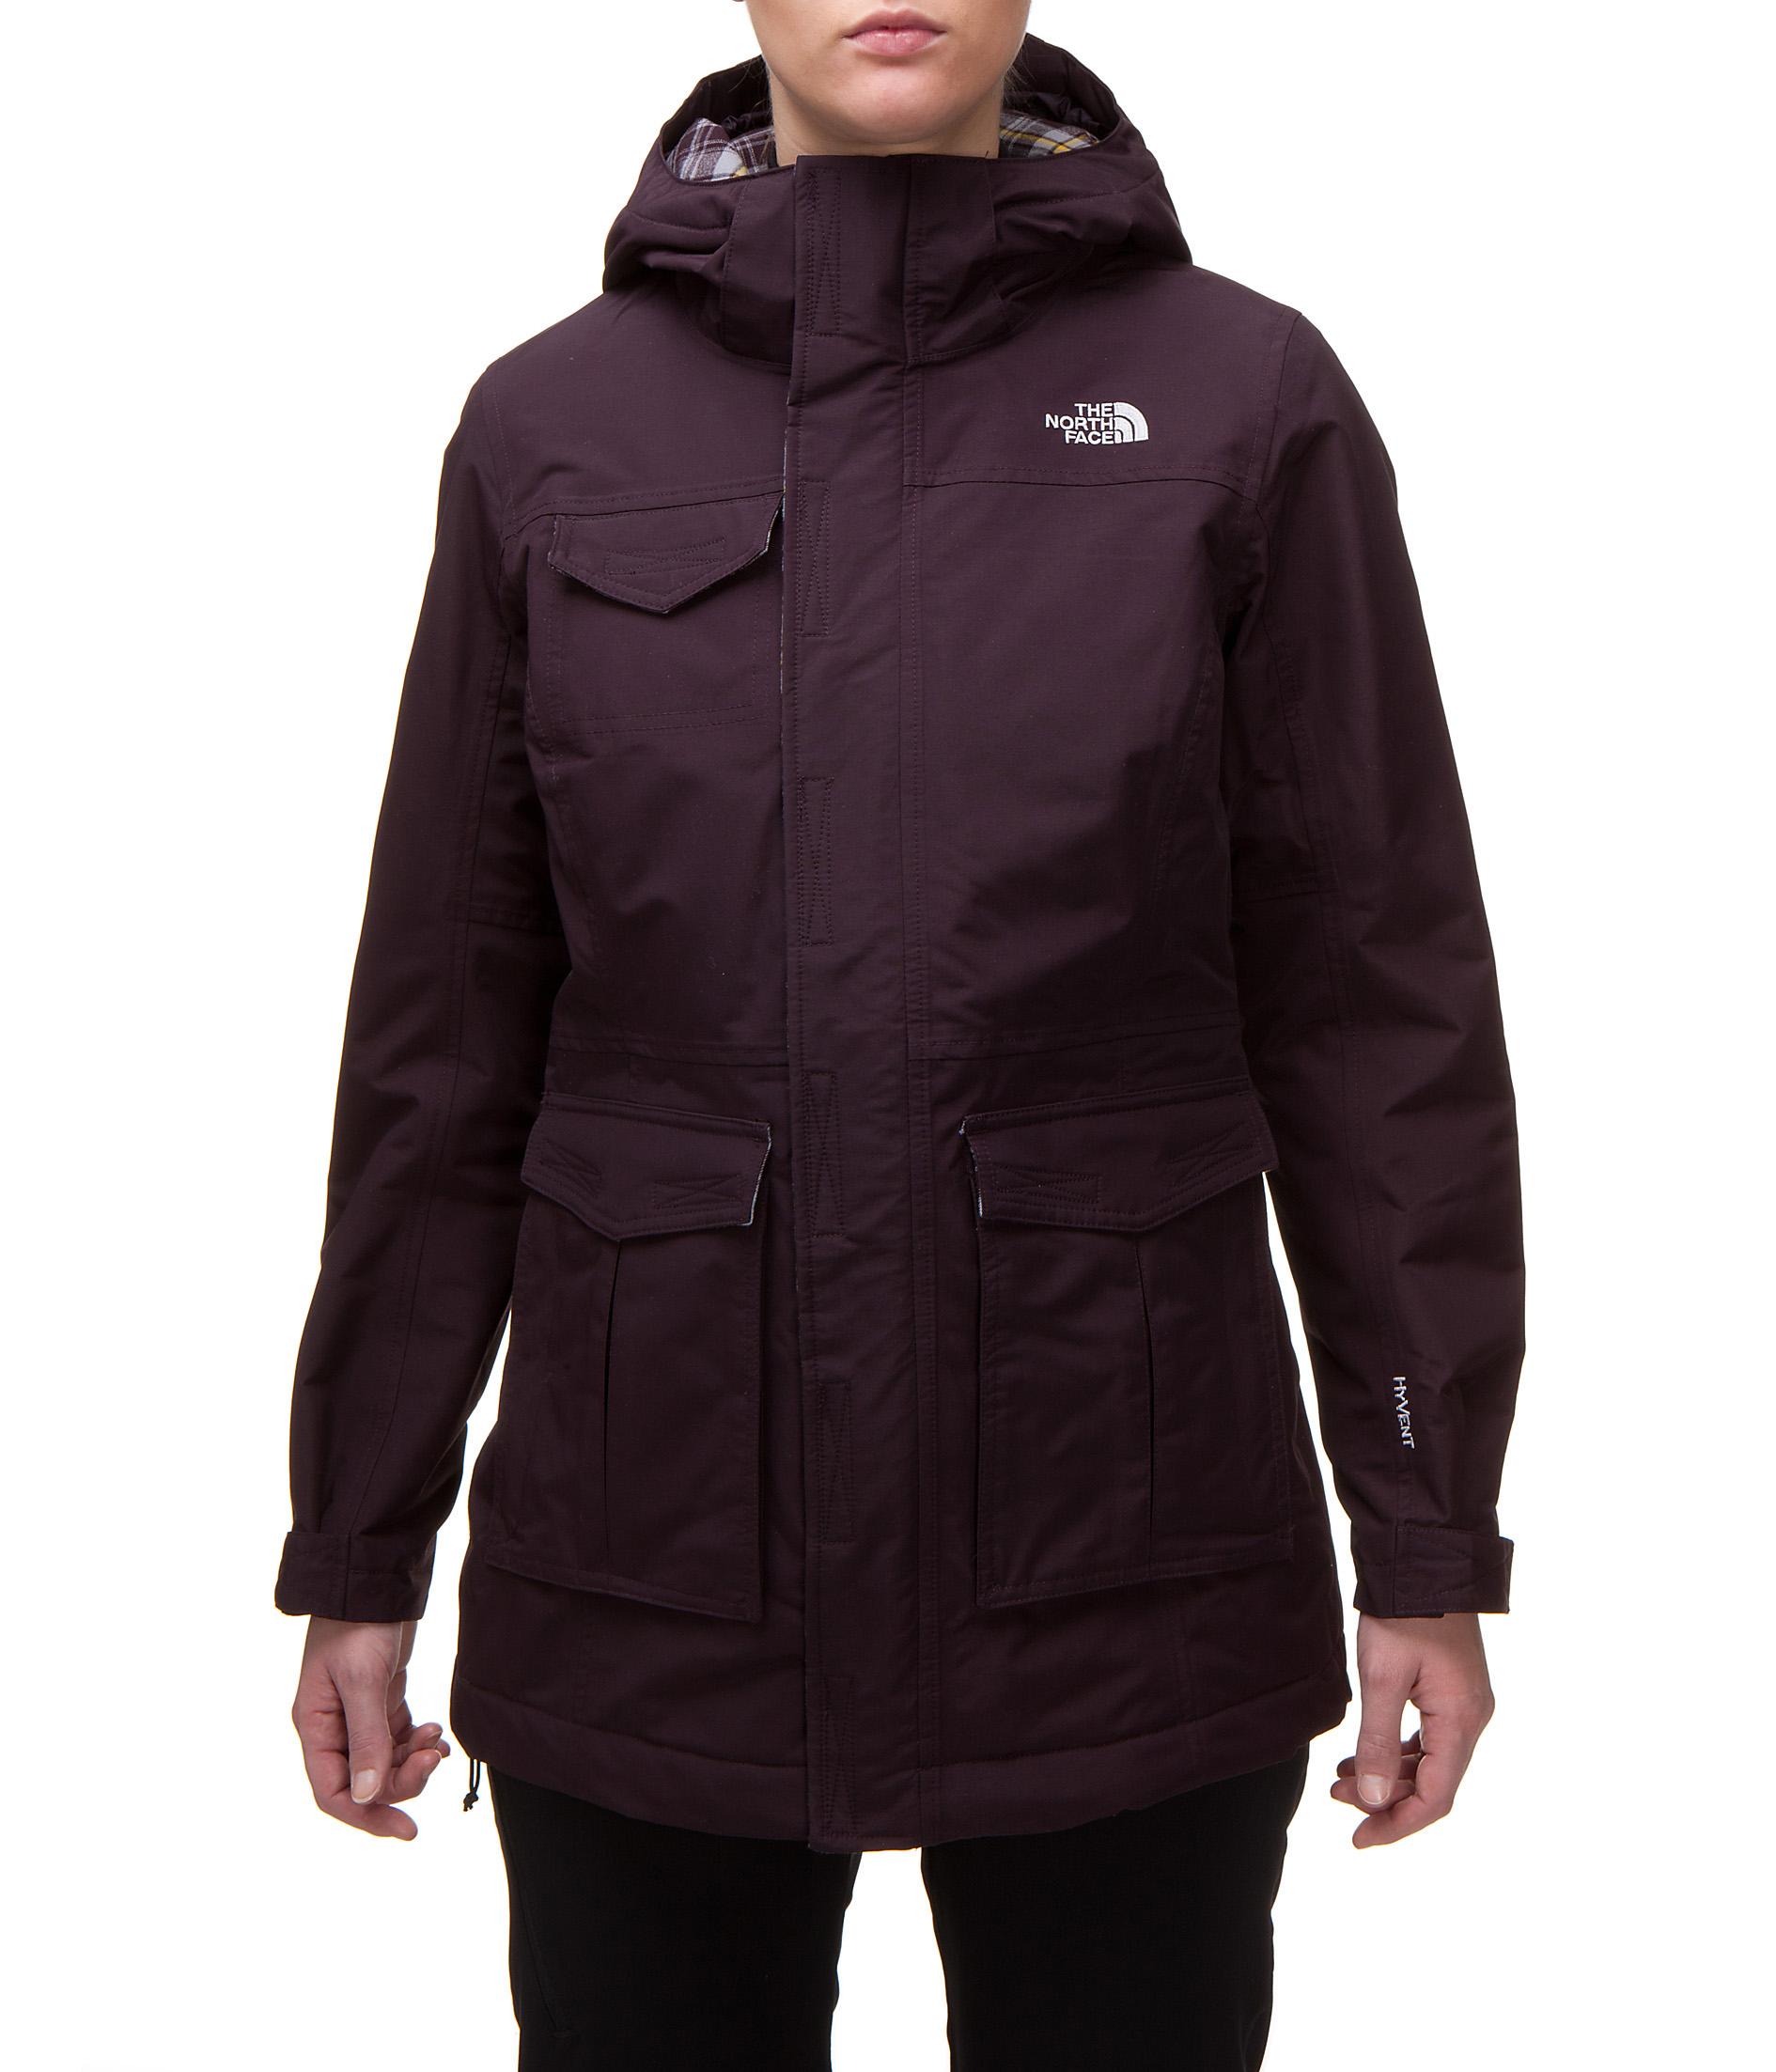 Foto The North Face Women's Winter Solstice Jacket